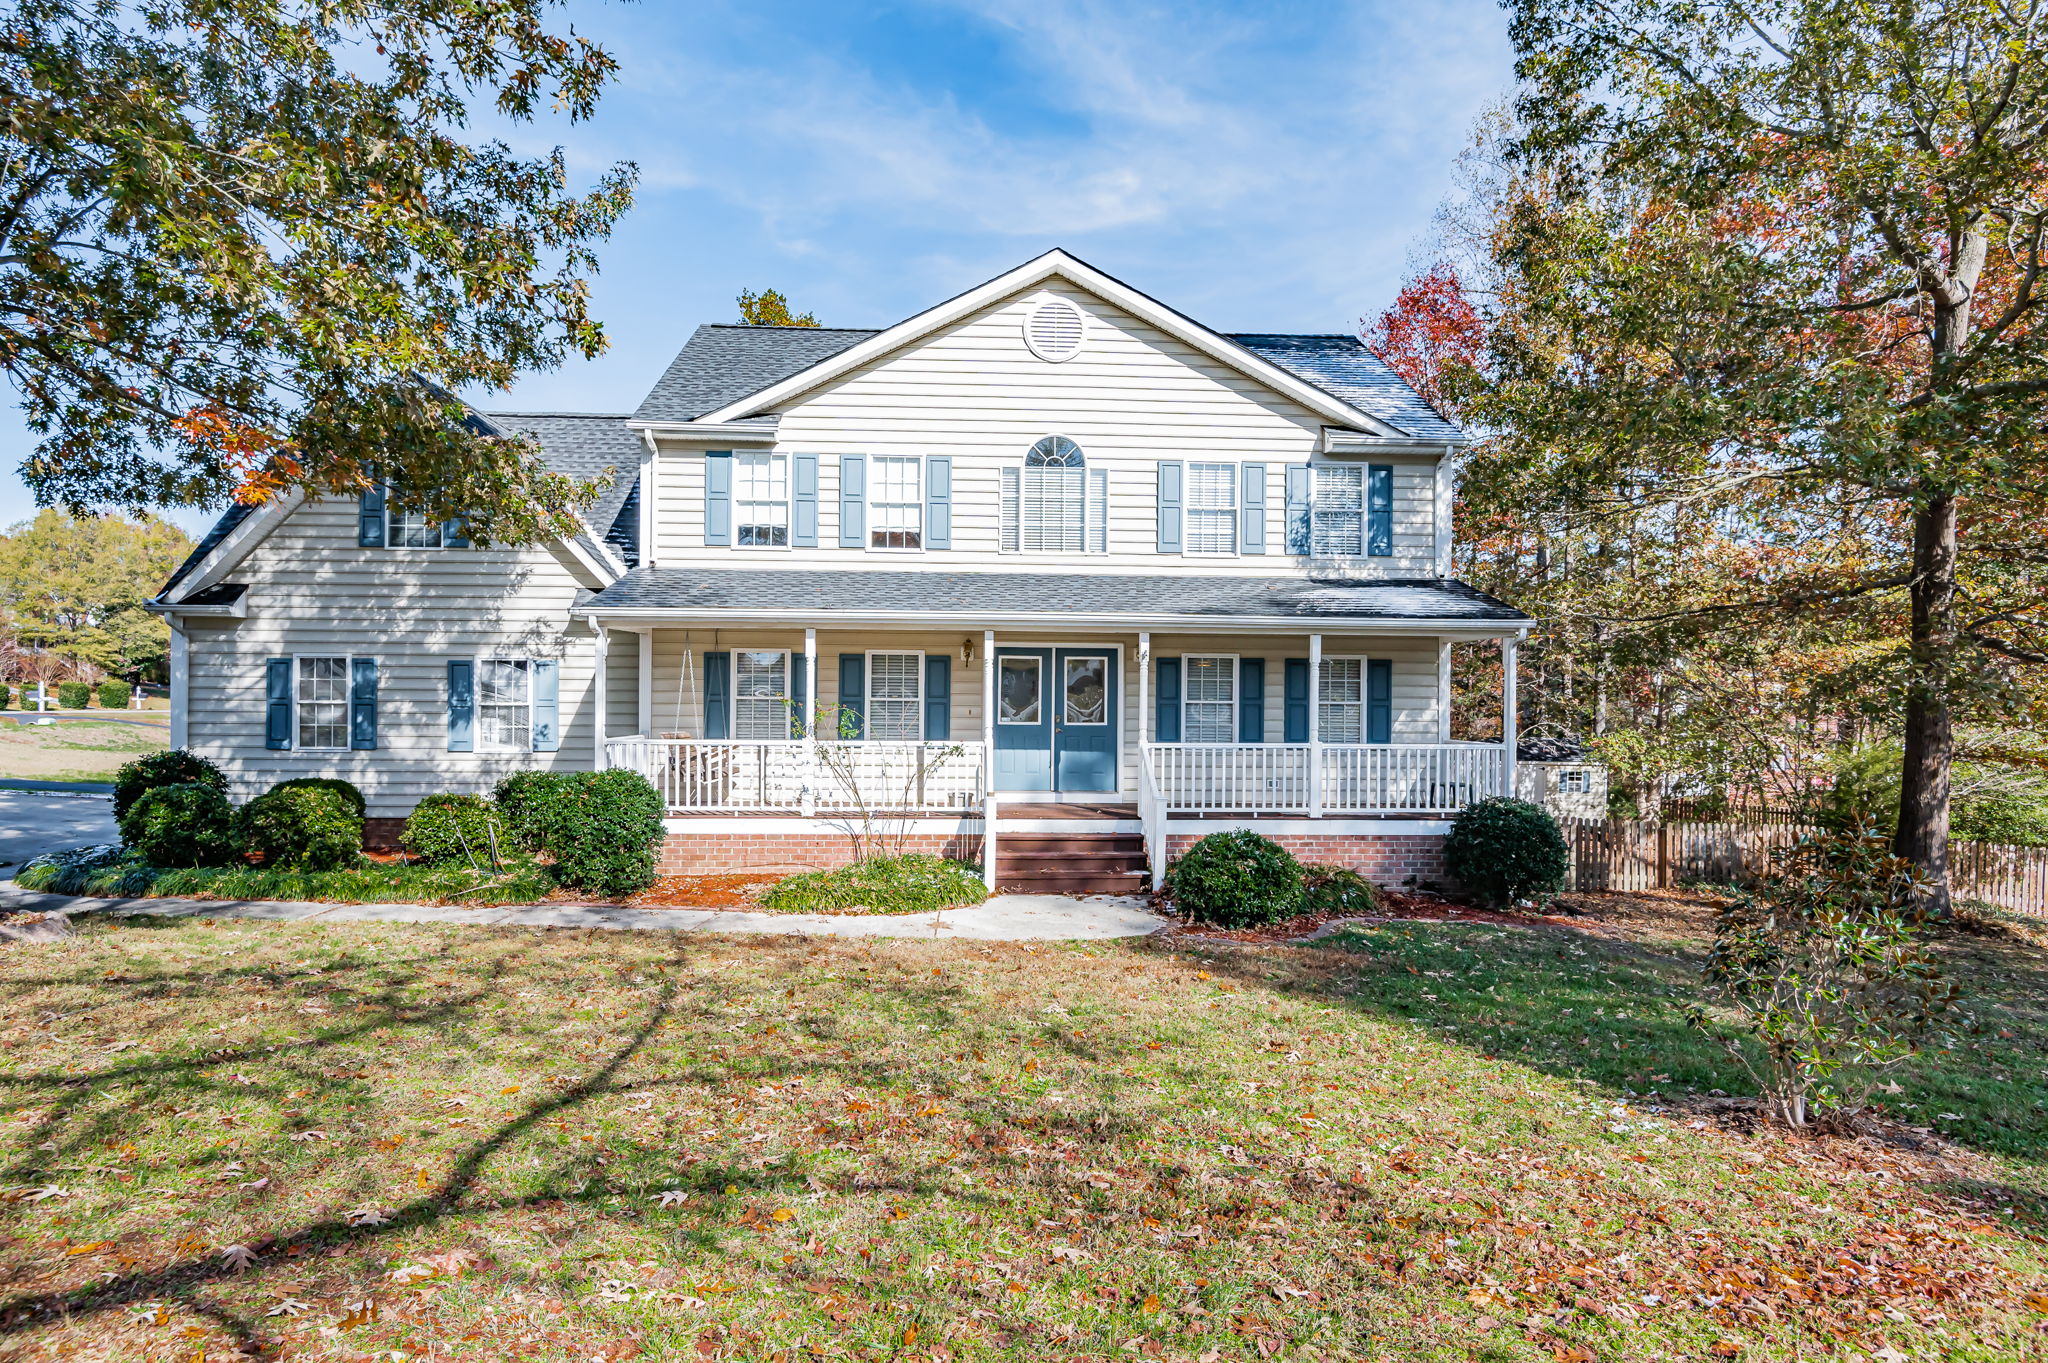  14931 Majestic Creek Dr, Colonial Heights, VA 23834, US